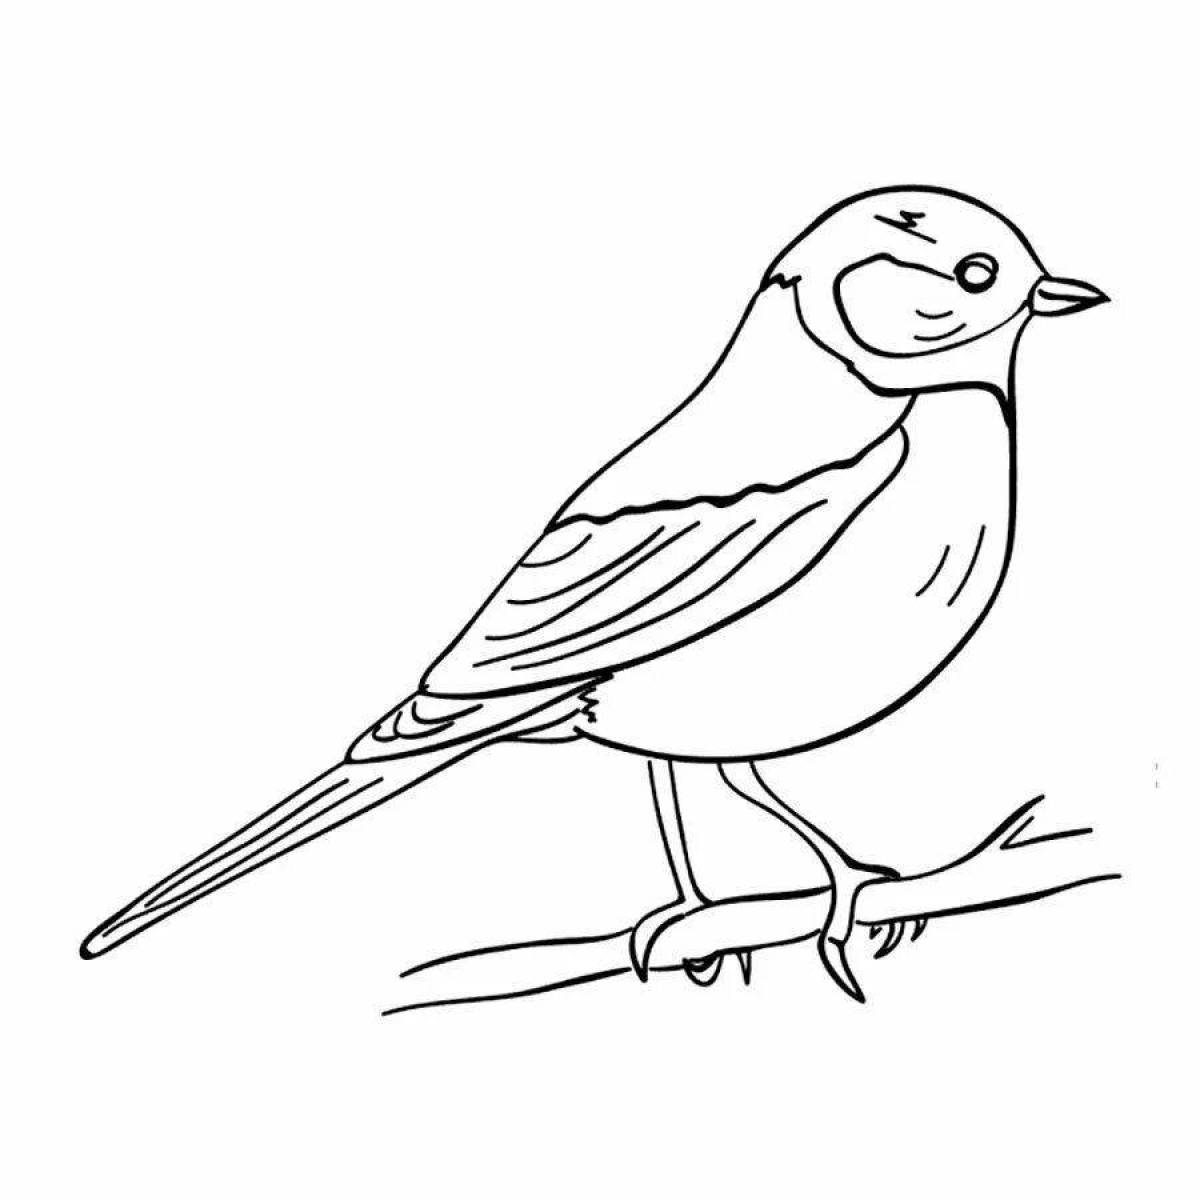 Colorful bird coloring pages for kids